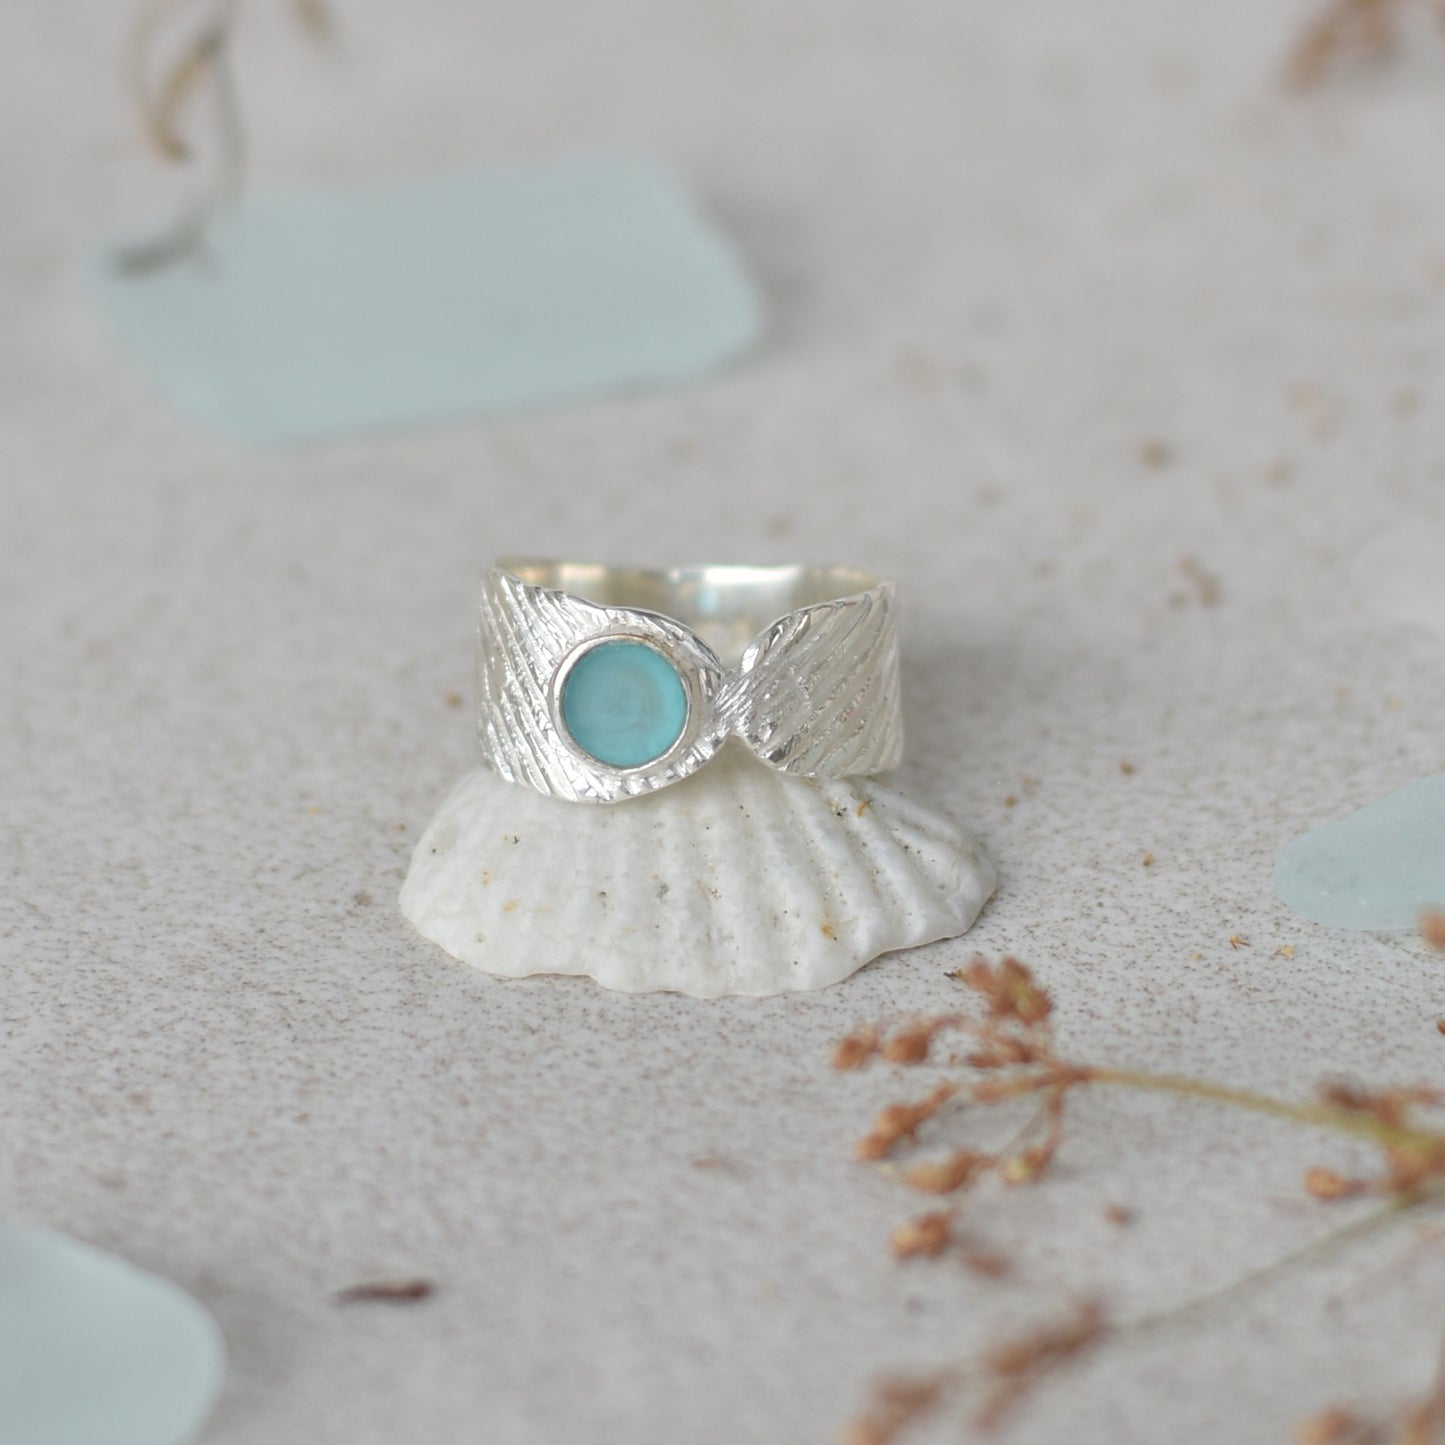 Venus shell structure ring